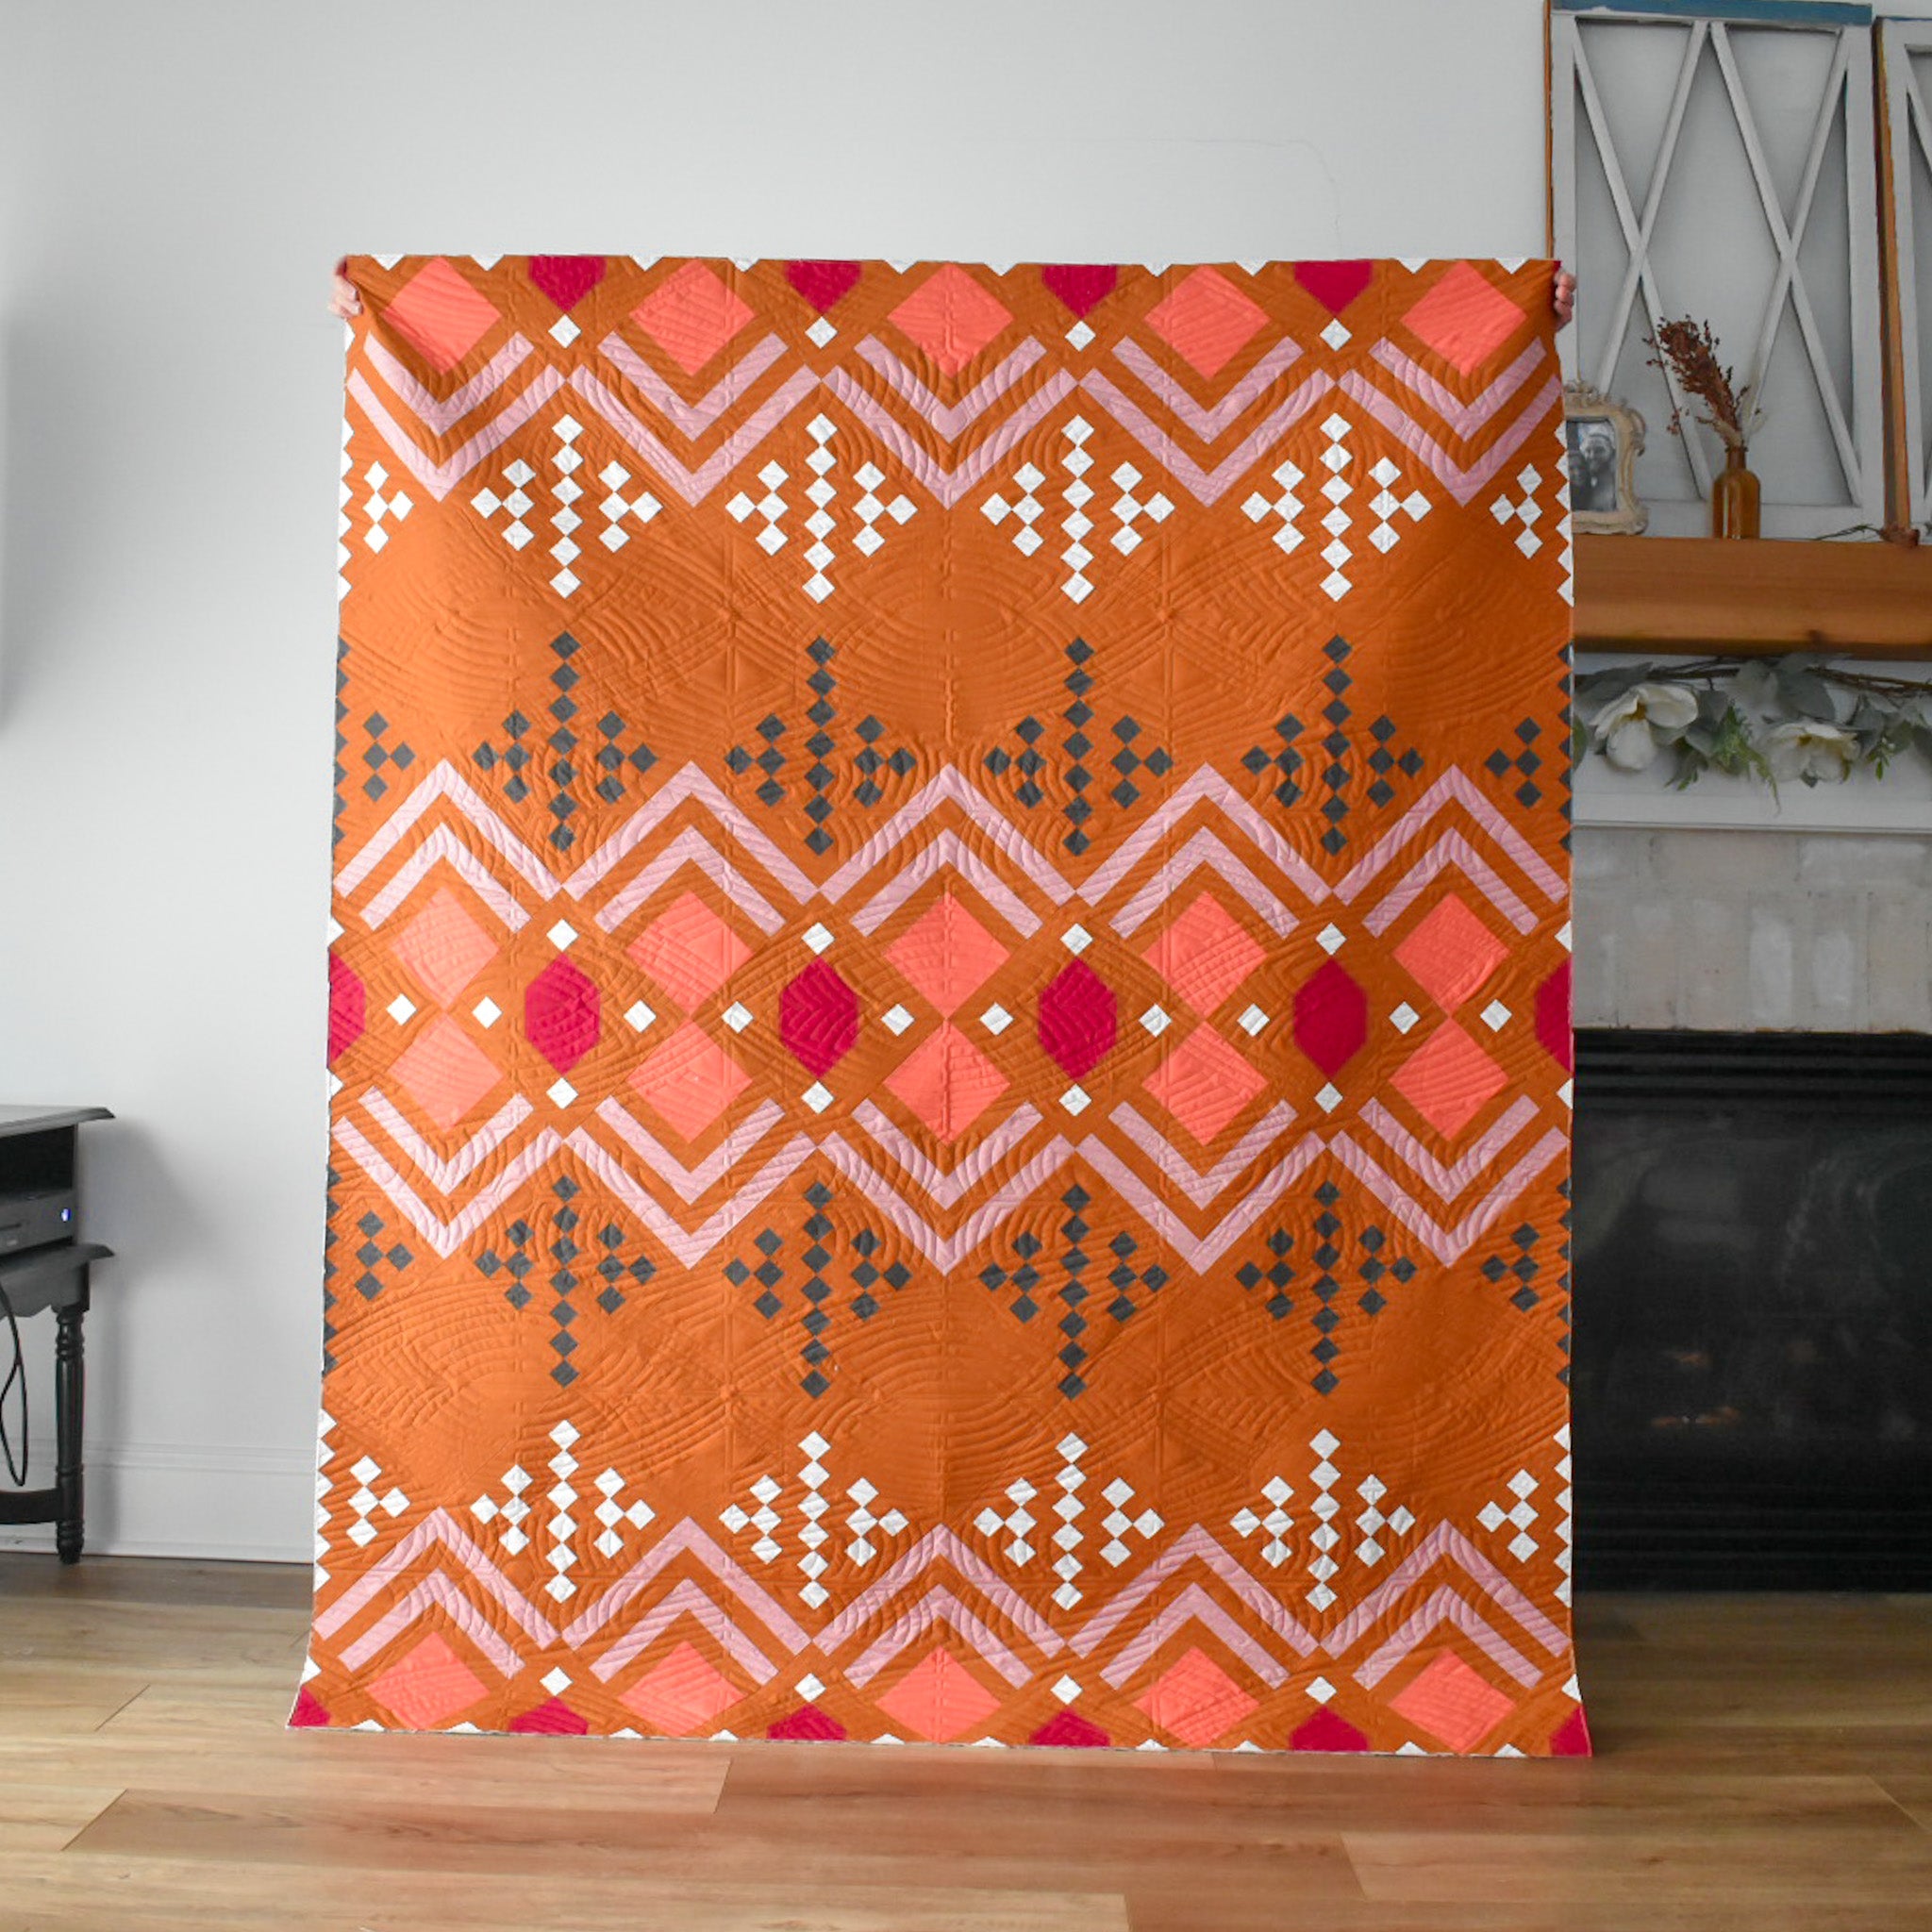 Deco Quilt - the Gingerbread version